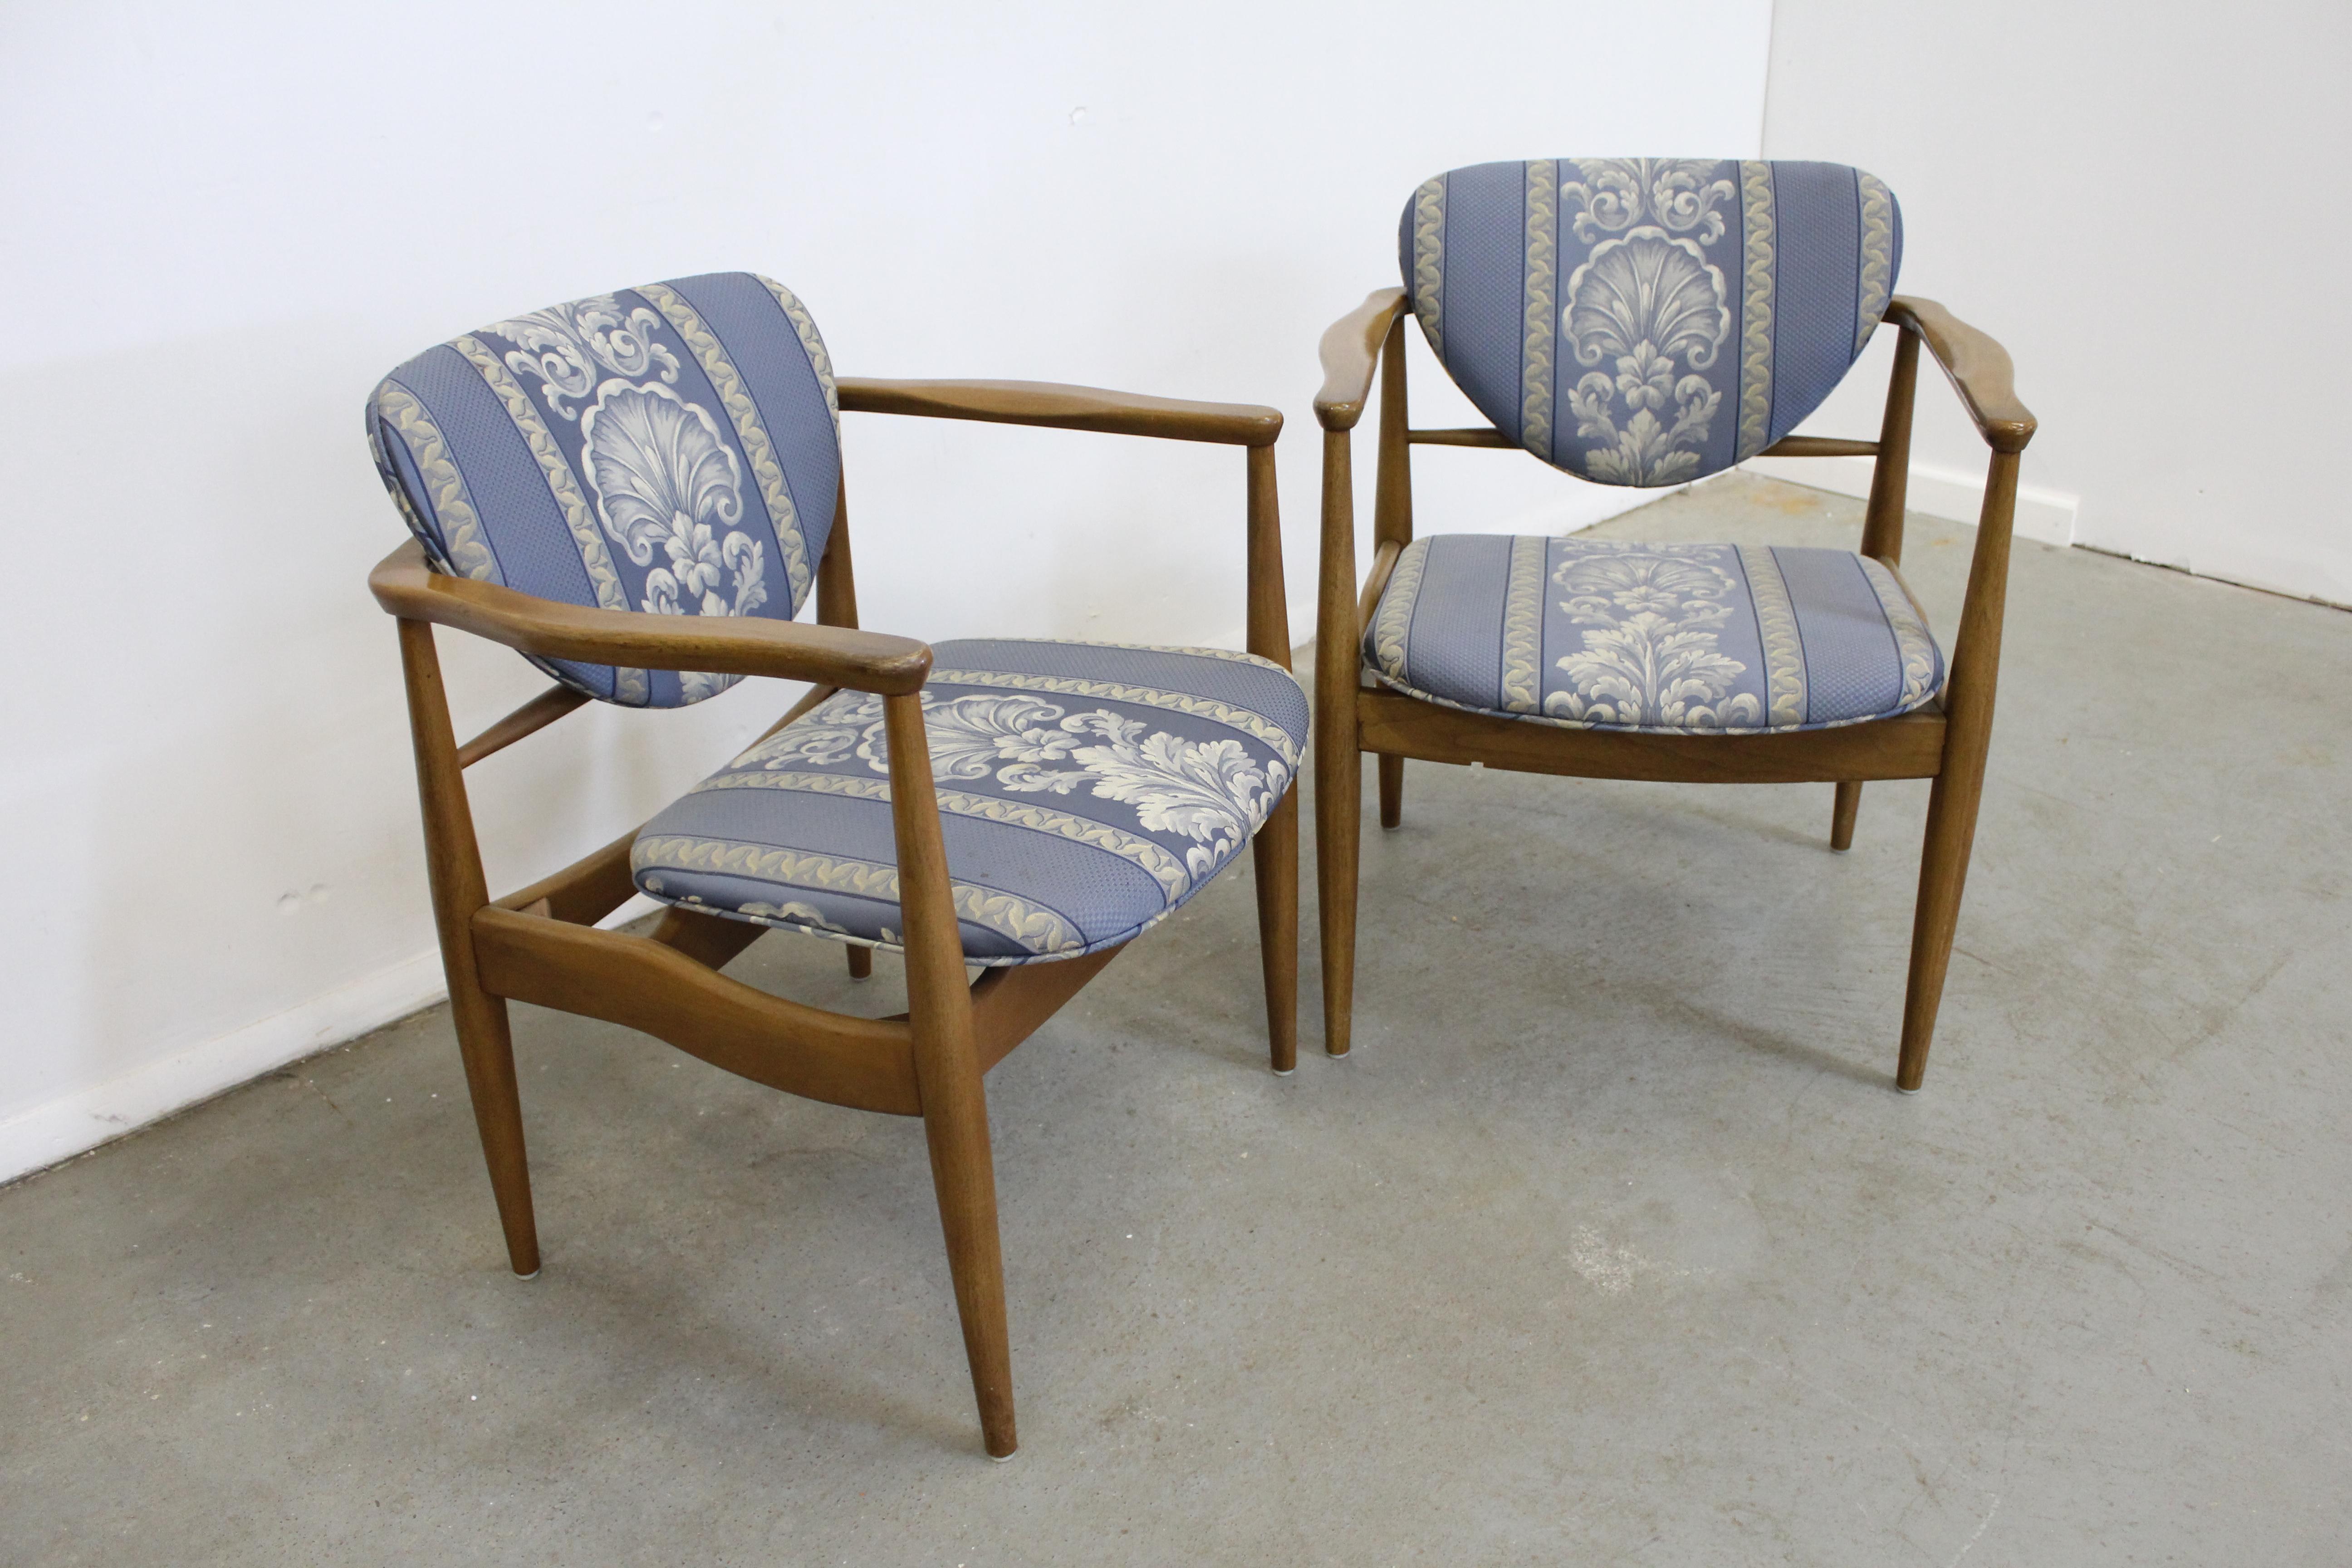 Pair of Mid-Century Danish Modern John Stuart Finn Juhl walnut armchairs
 
Offered is a pair of Mid-Century Modern arm chairs attributed to Finn Juhl. Look to be walnut and have been reupholstered by their previous owner. In good, structurally